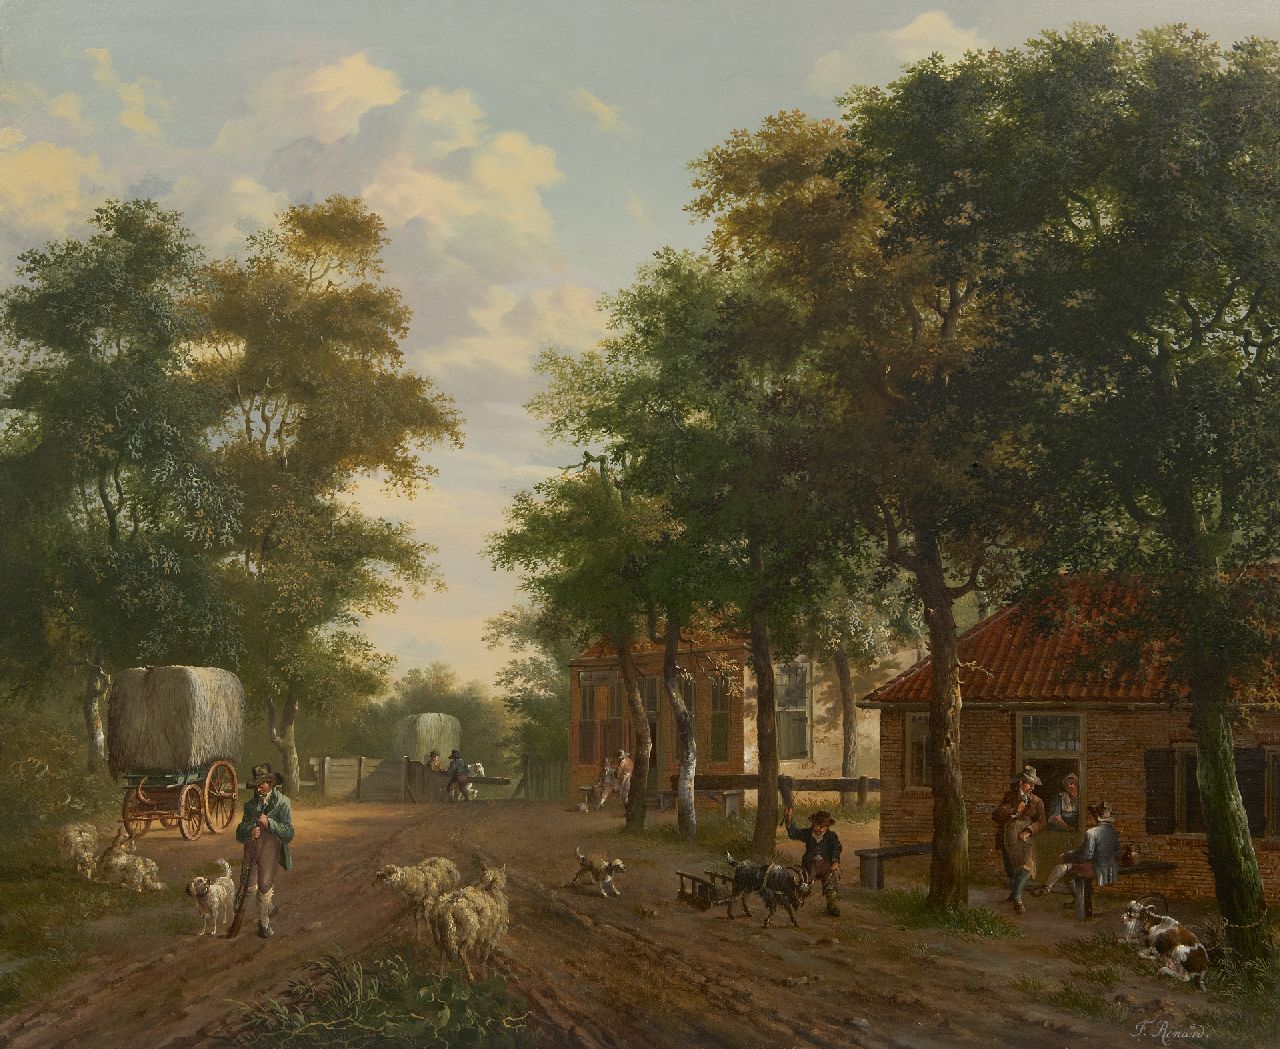 Fredericus Theodorus Renard | Rural activities in a village, oil on panel, 52.1 x 63.4 cm, signed l.r.